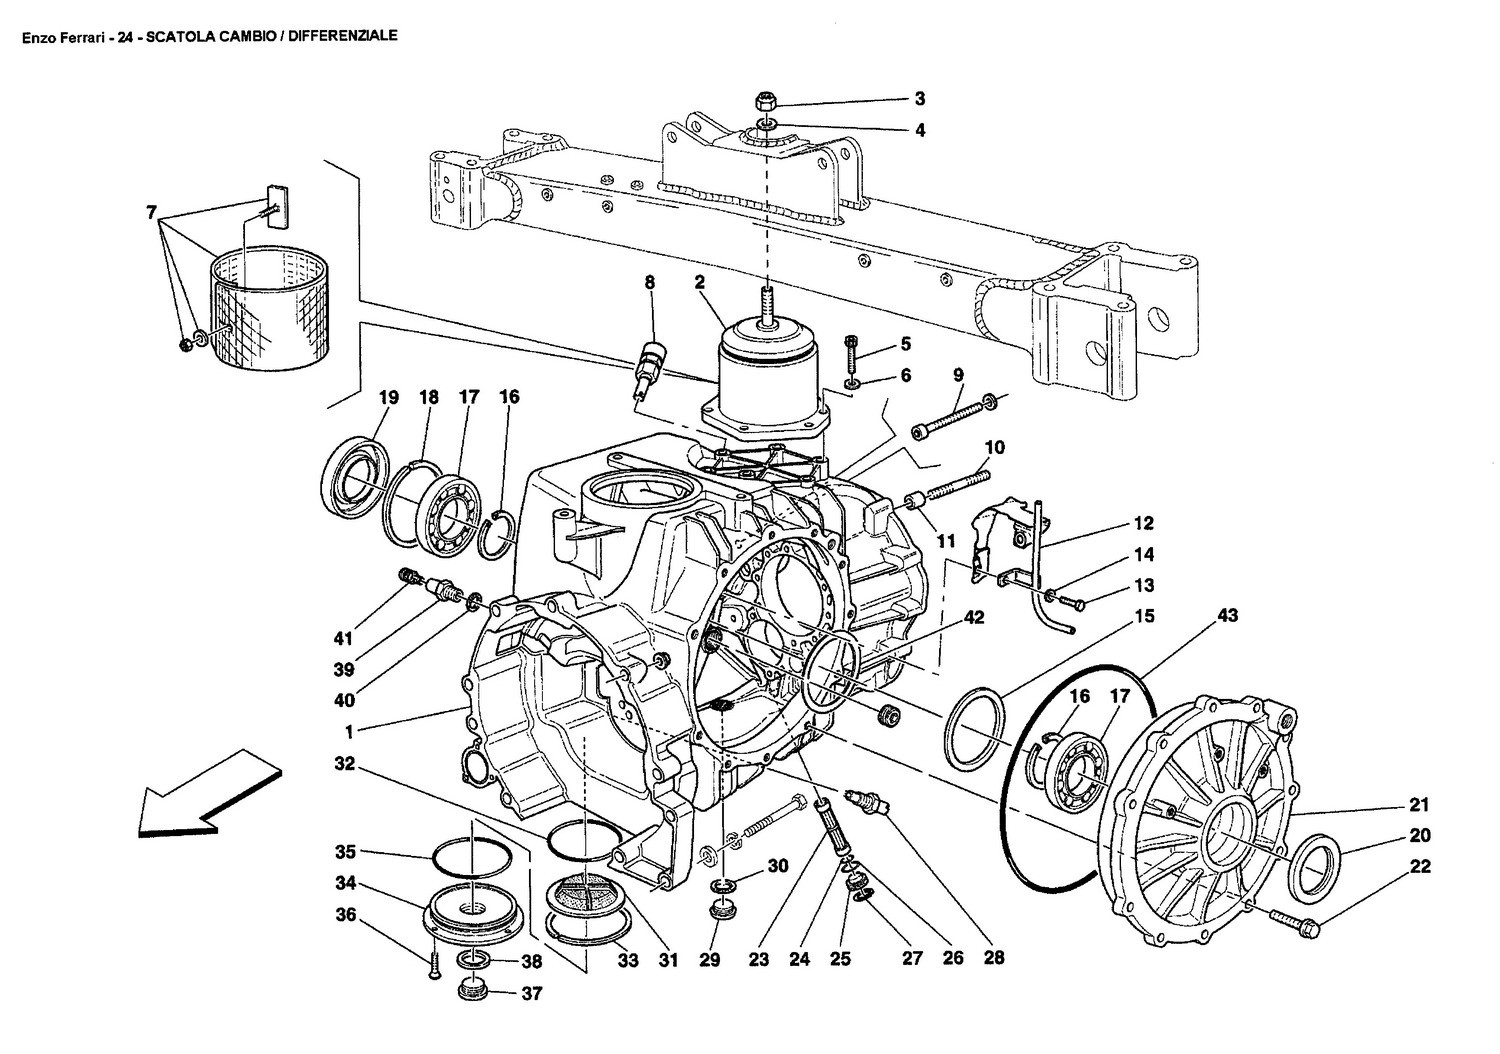 GEARBOX / DIFFERENTIAL HOUSING